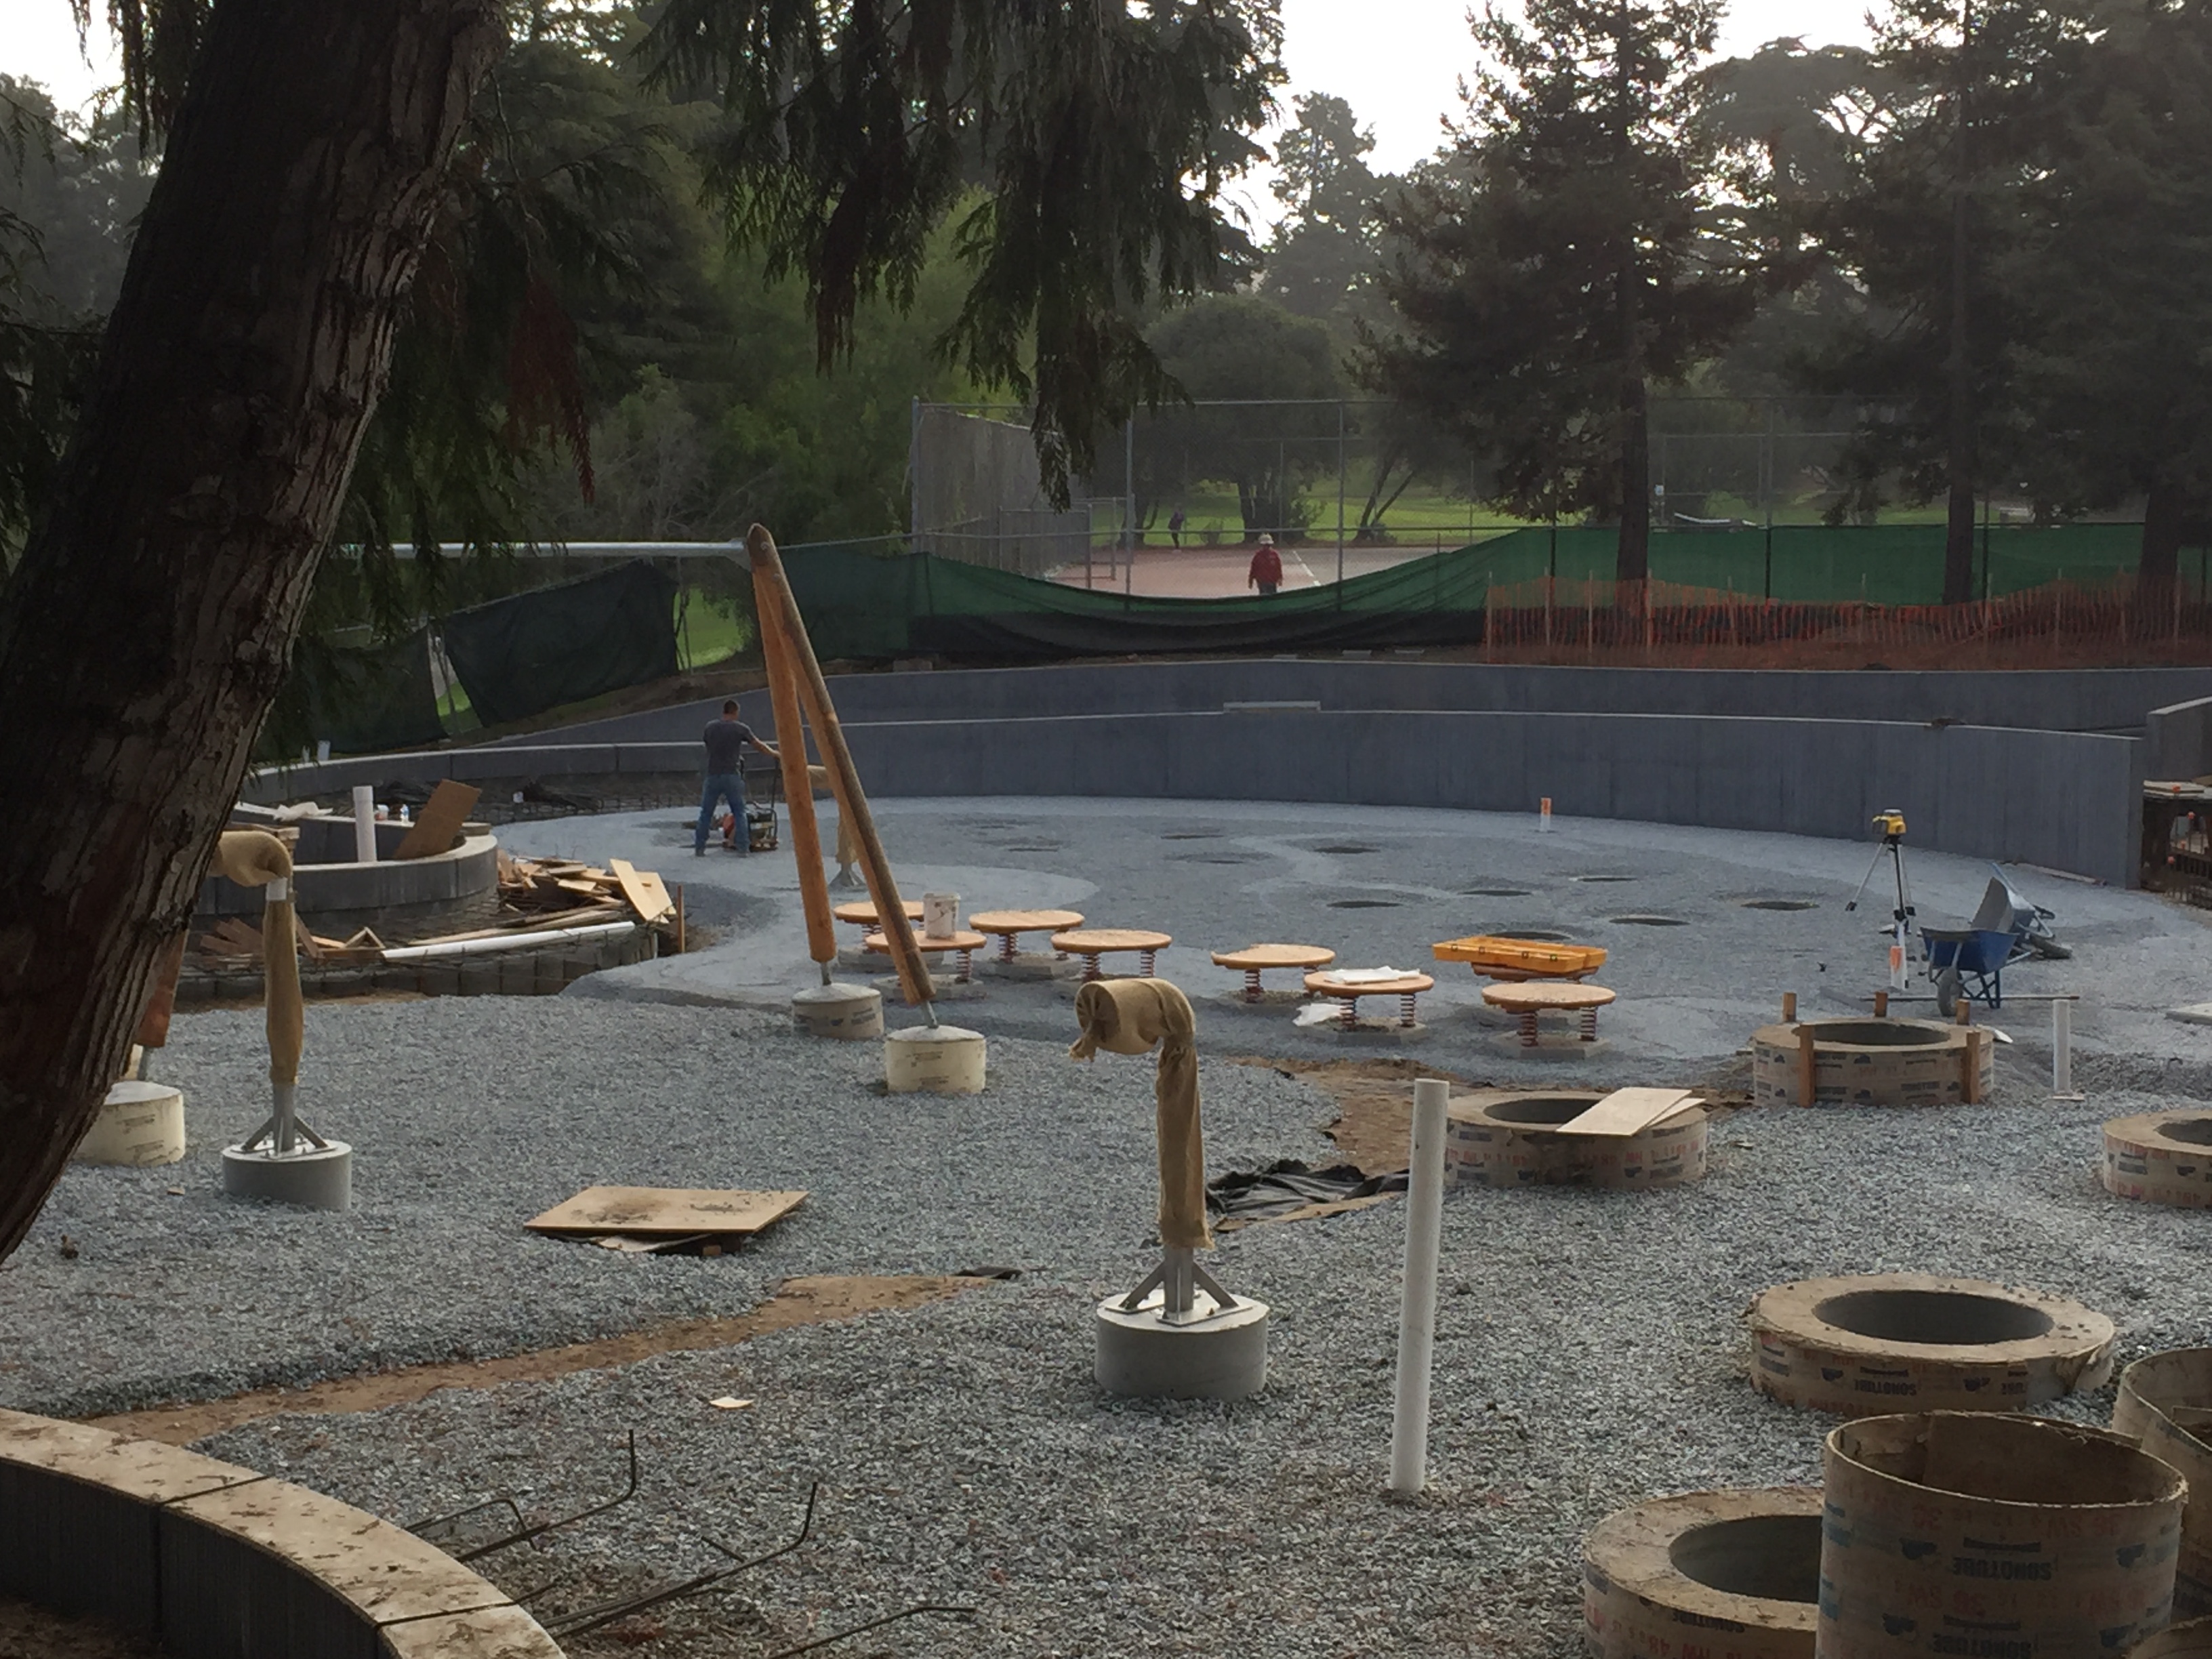 Under construction: The north end of the Mt Lake Park playground